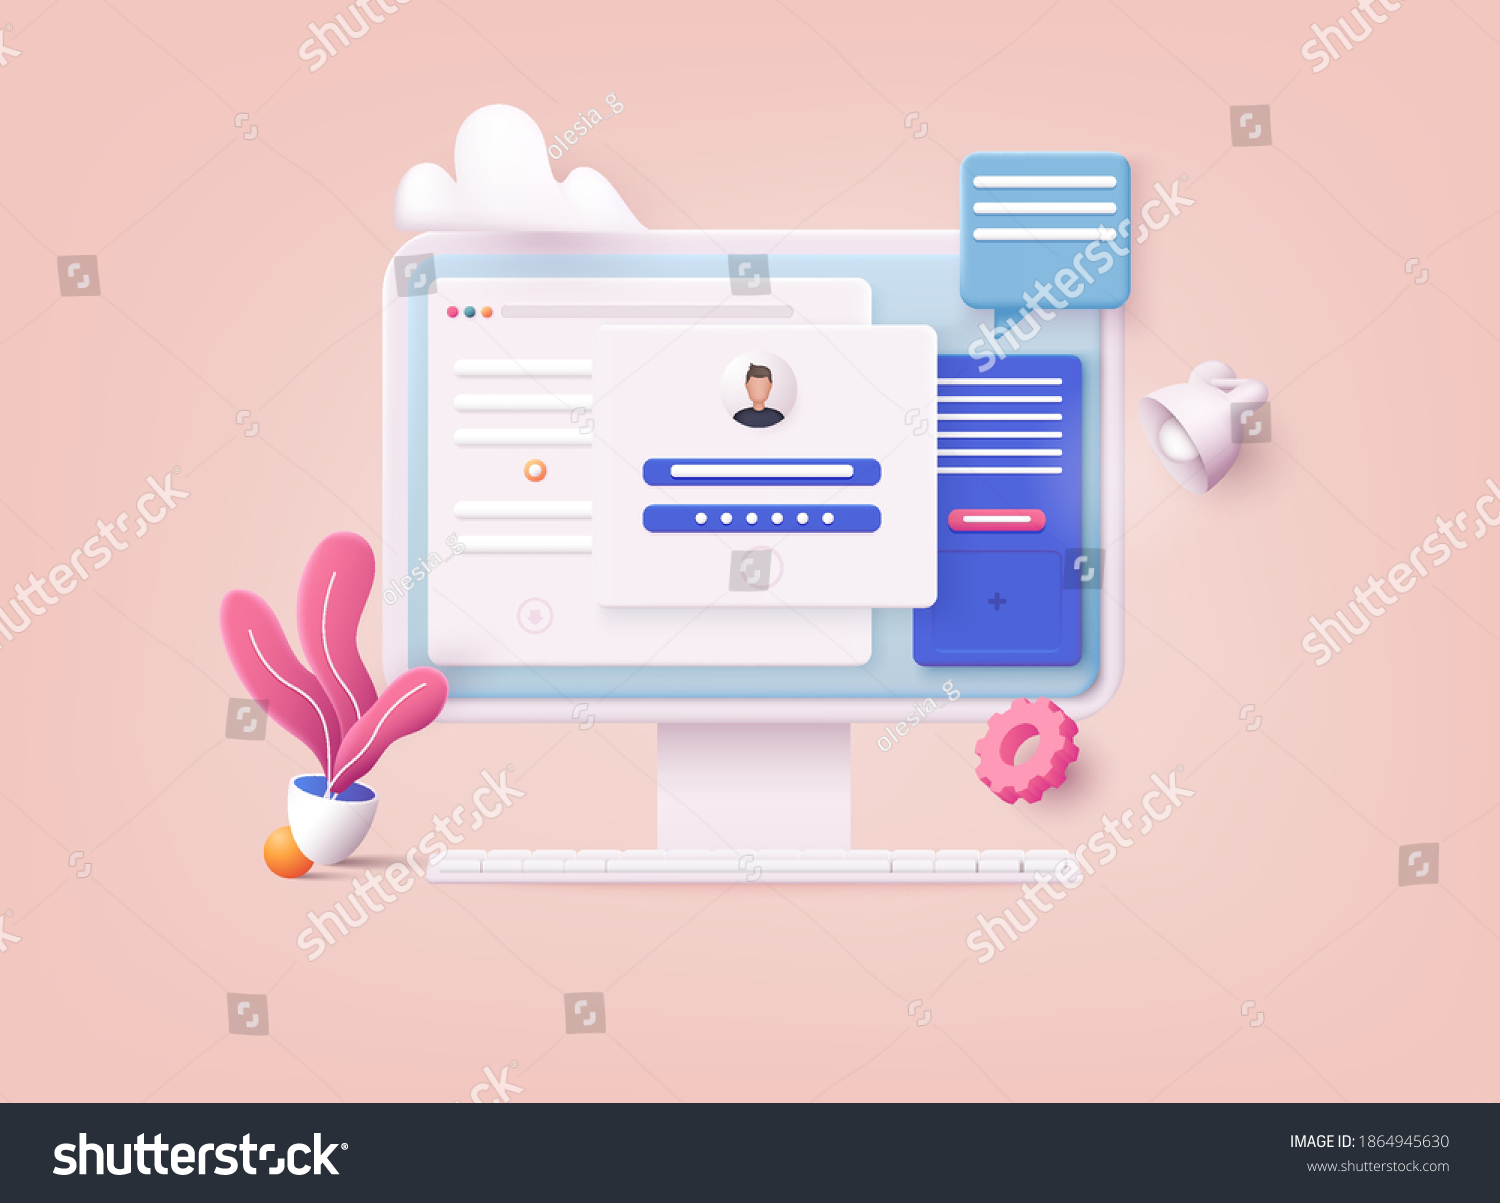 3D Web Vector Illustrations. Computer and account login and password form page on screen. Sign in to account, user authorization, login authentication page concept. Username, password fields. #1864945630